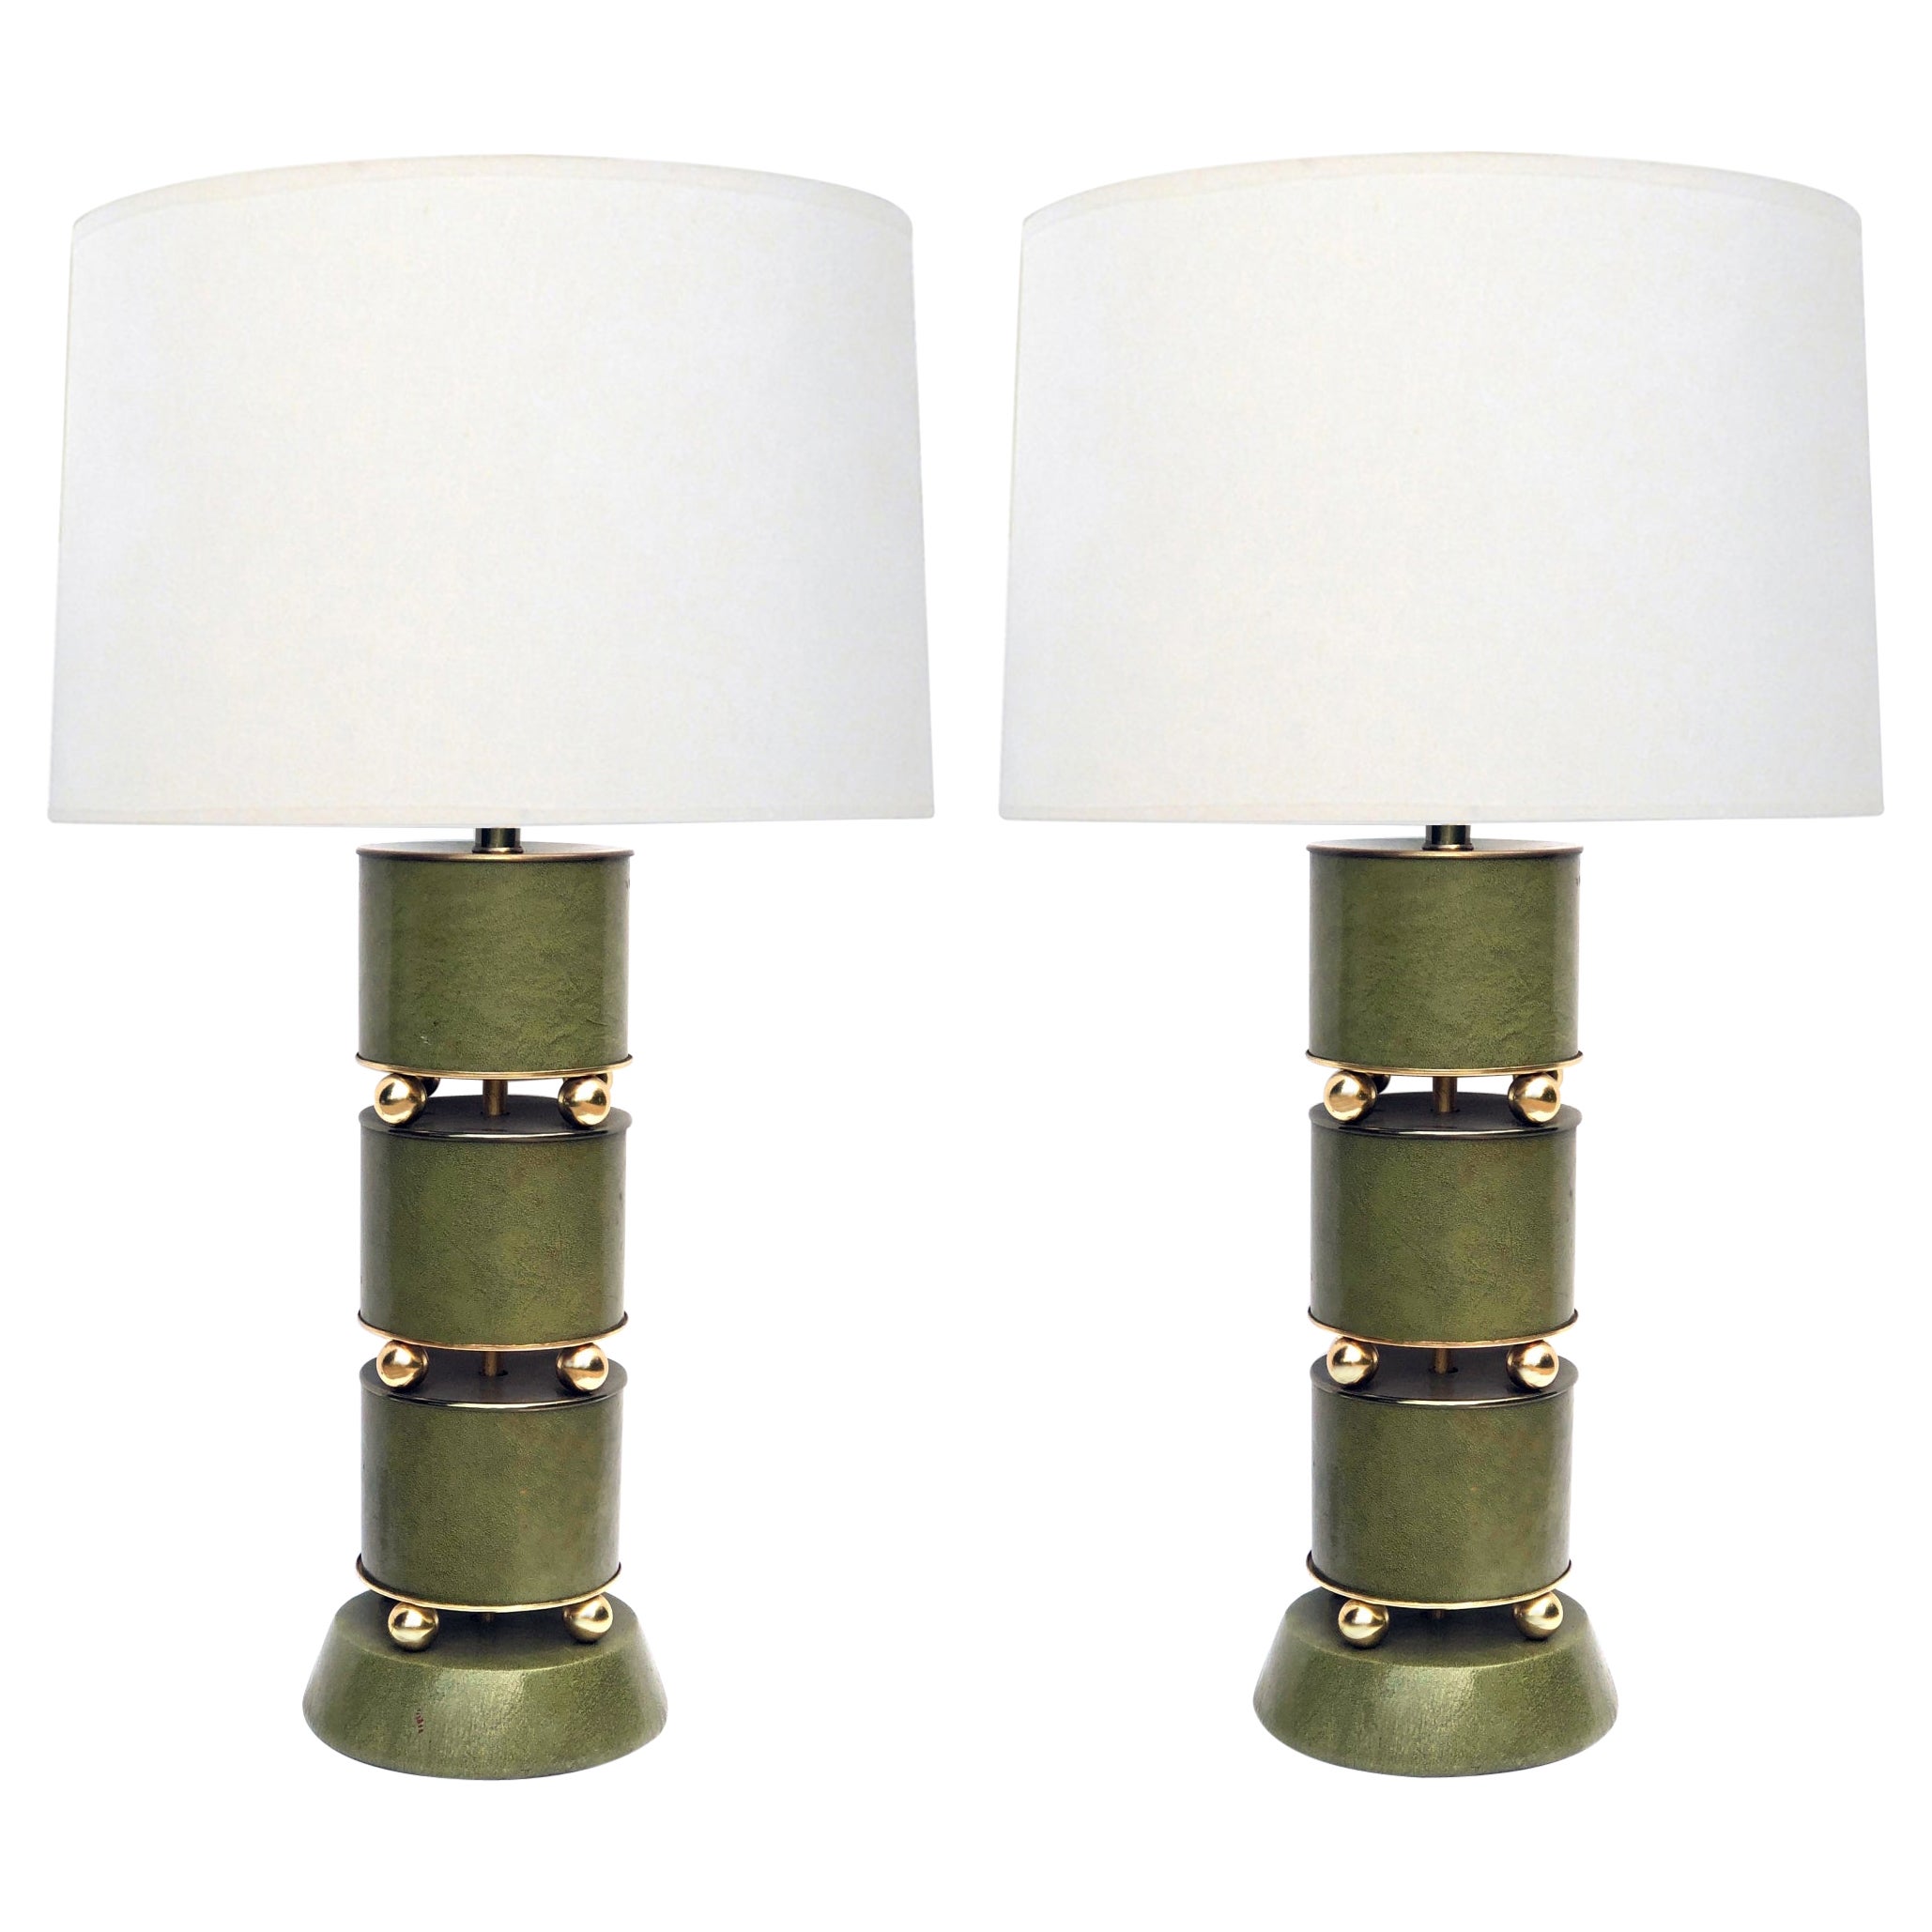 Stylish Mid-Century Green Leather Clad Lamps with Brass Spheres